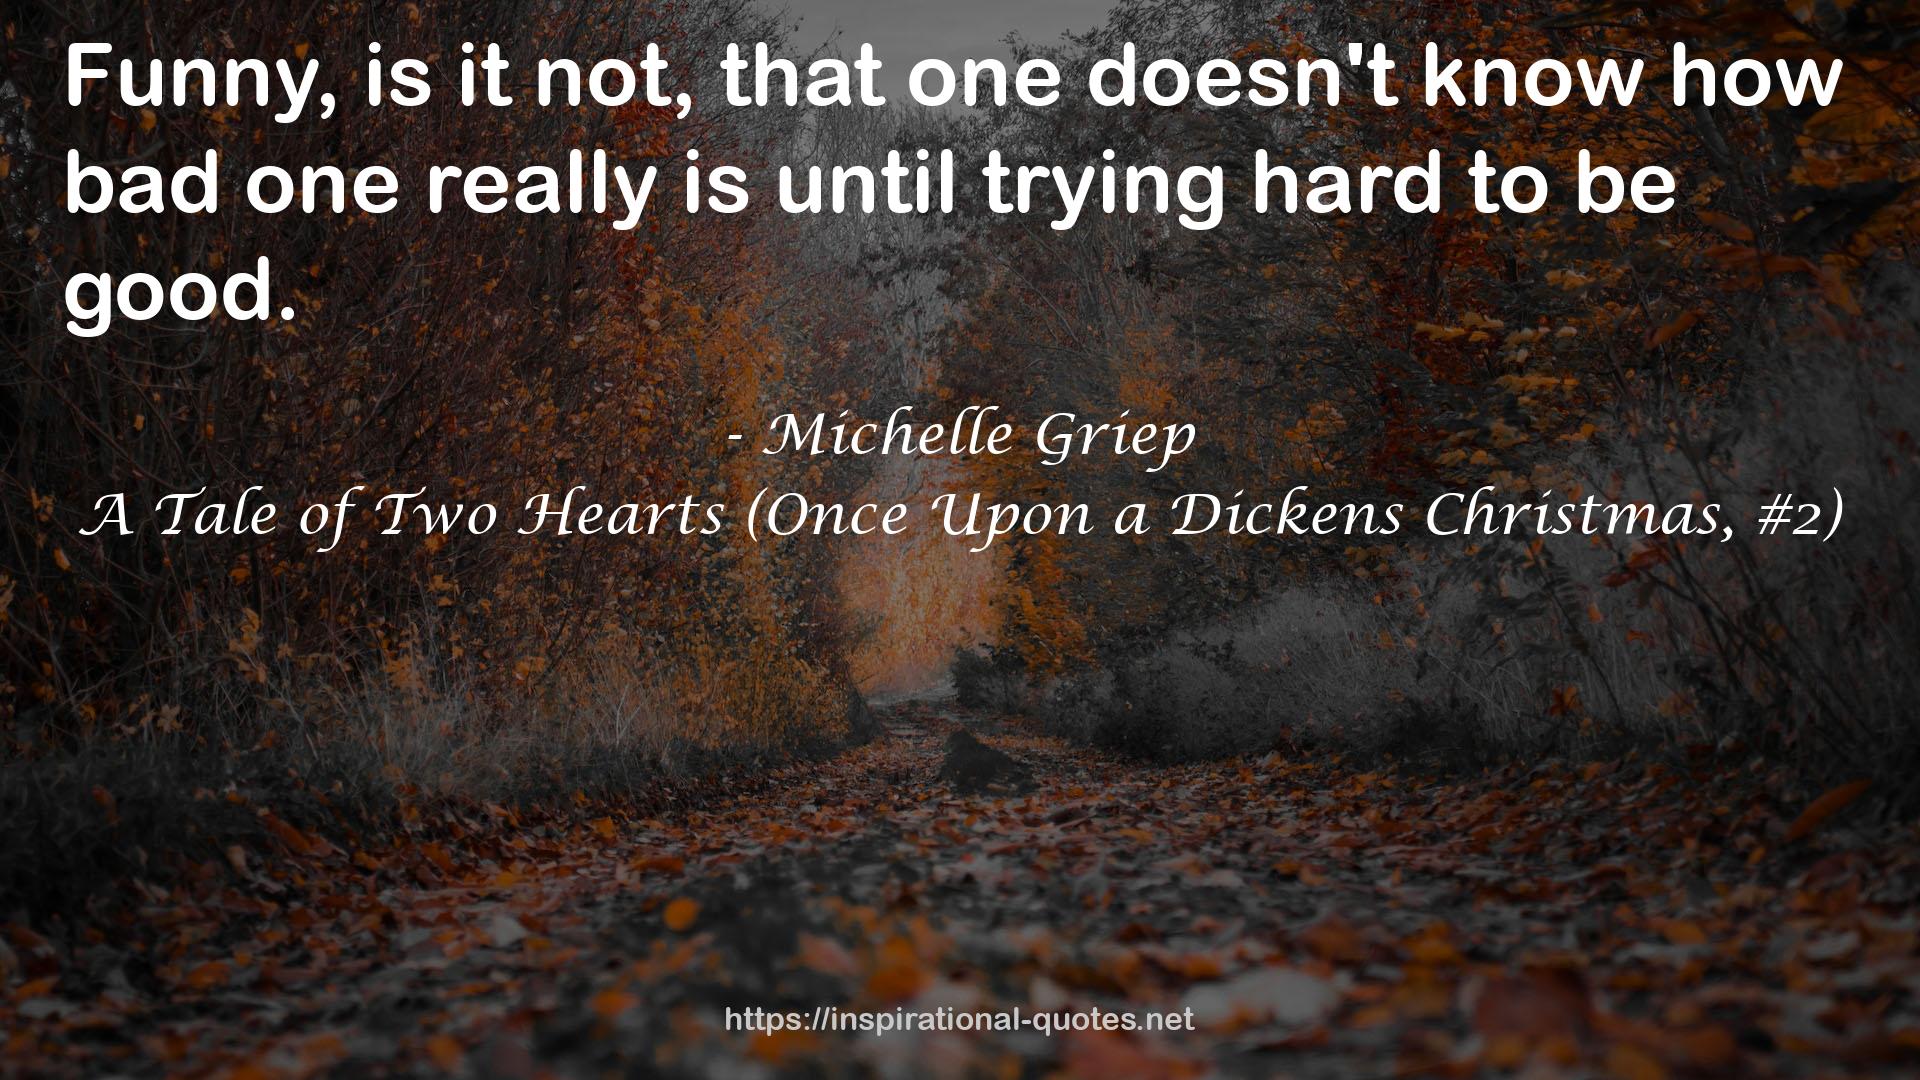 A Tale of Two Hearts (Once Upon a Dickens Christmas, #2) QUOTES